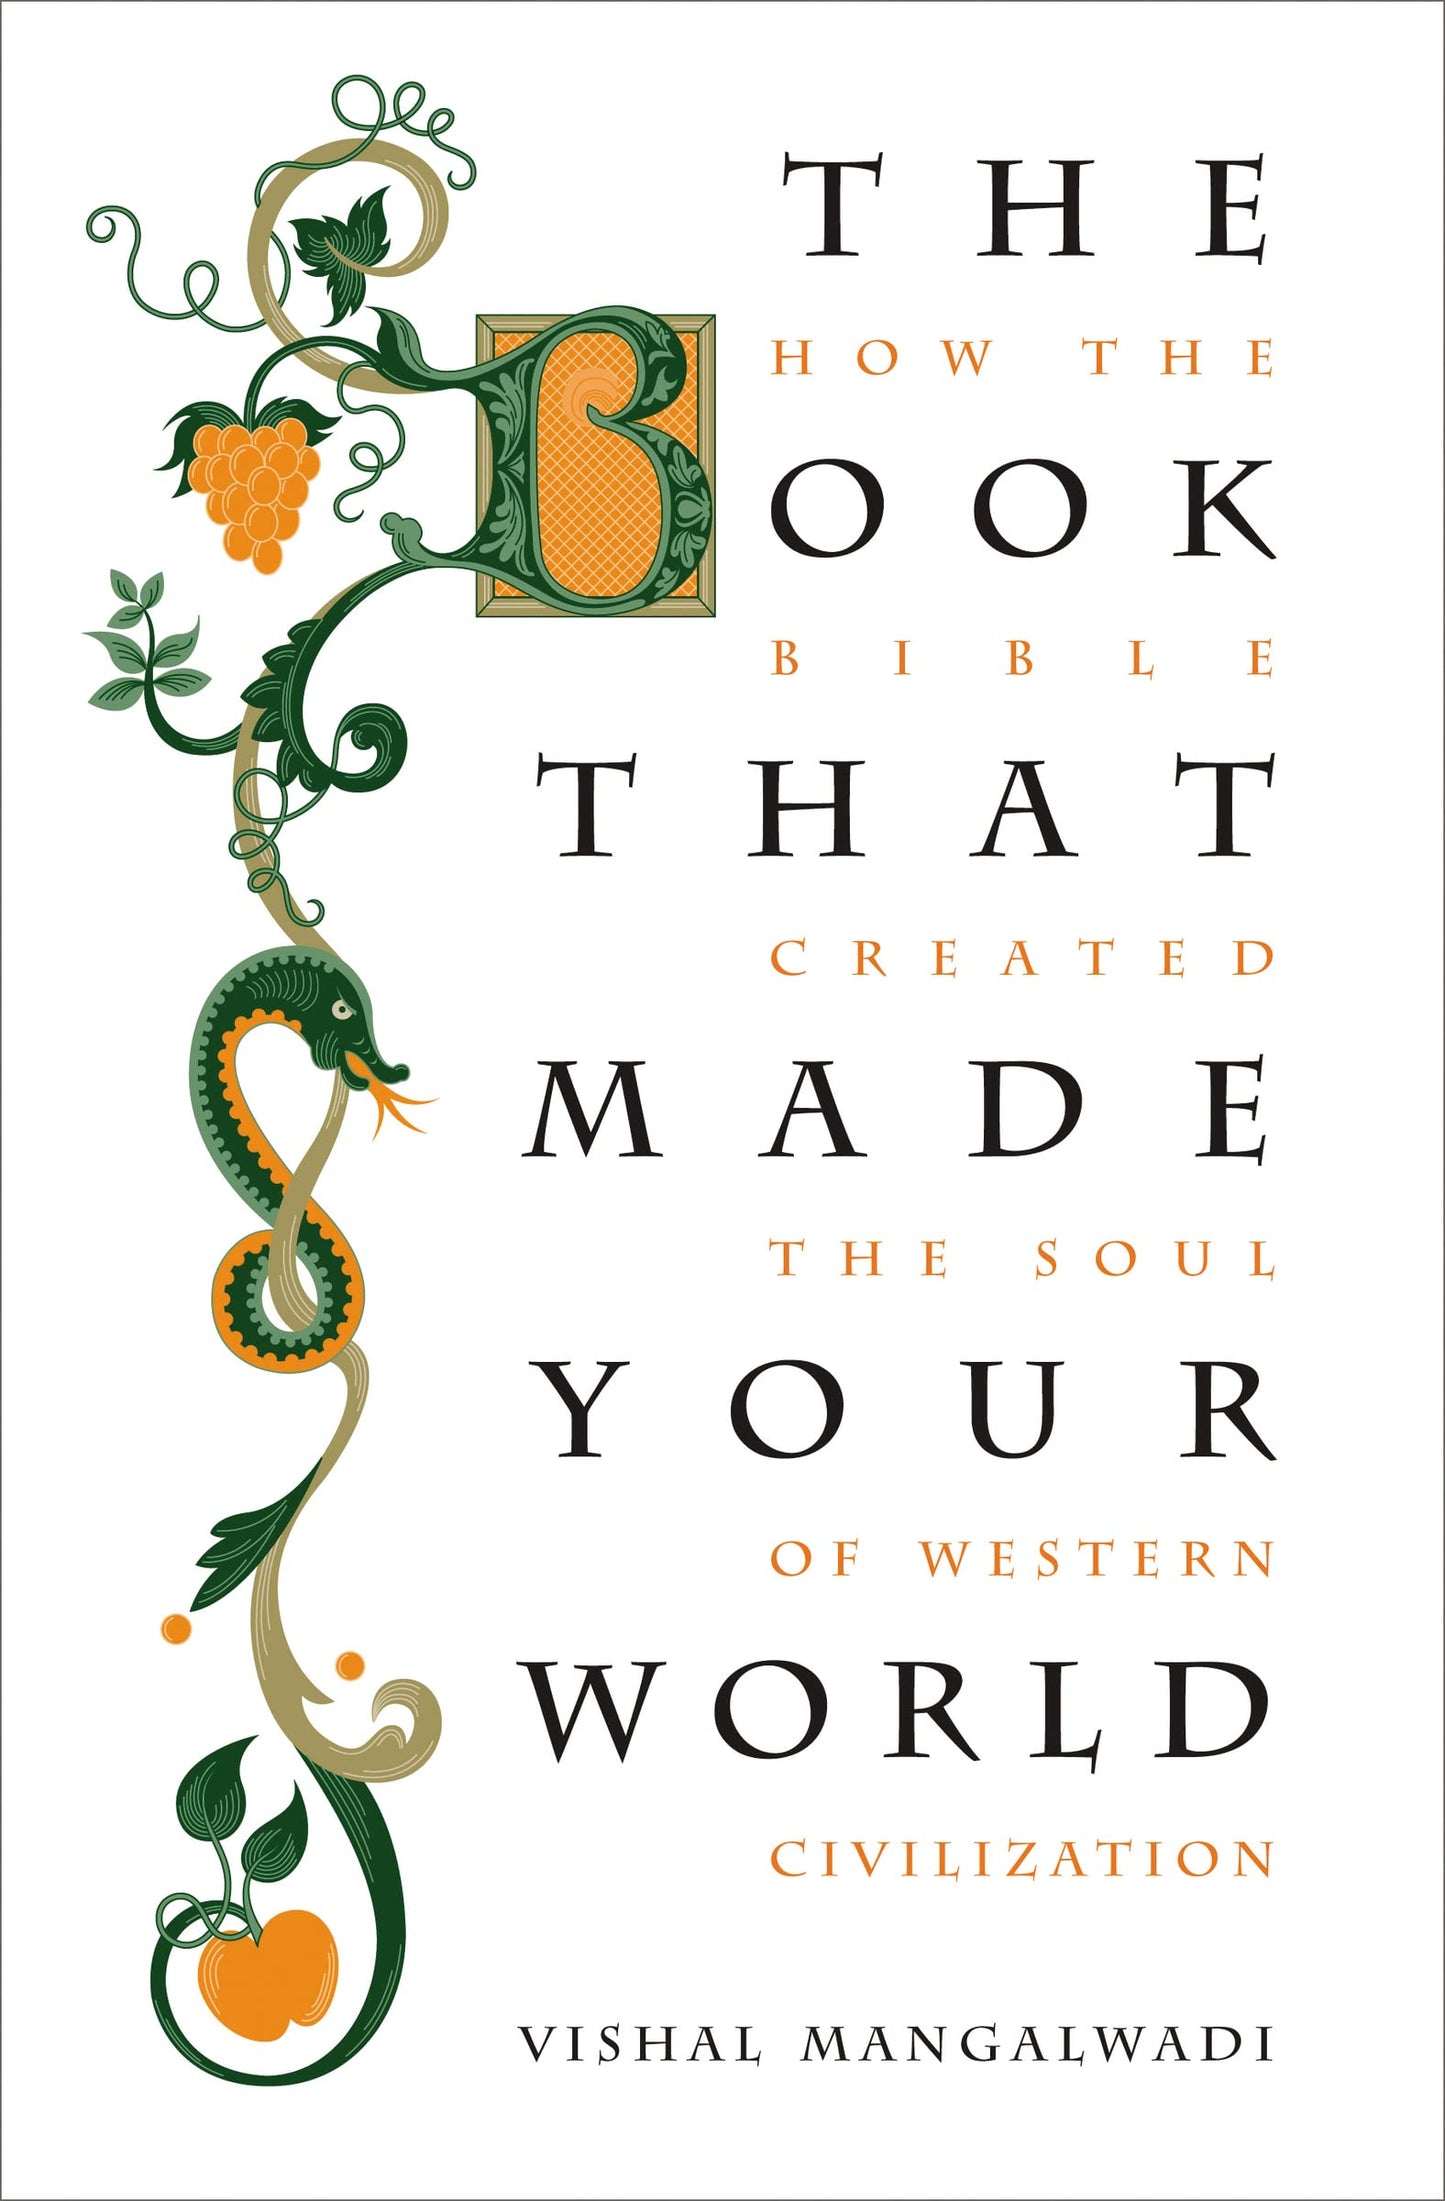 Book that Made Your World (Mangalwadi - paperback)